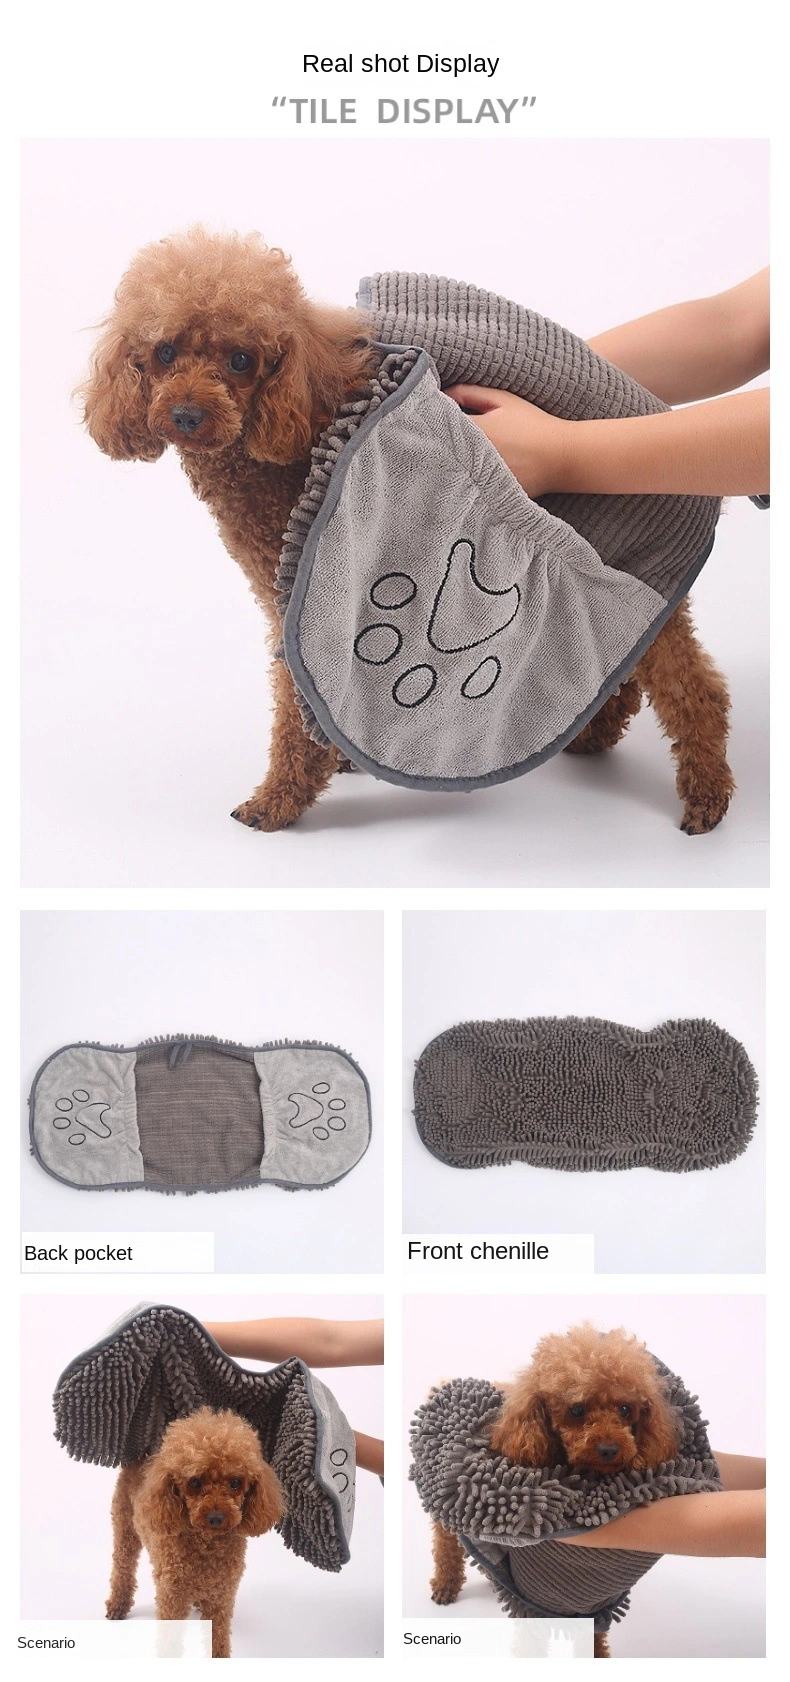 Pawsomechenille Pocket Towel: The Customizable Soft and Absorbent Pet Towel